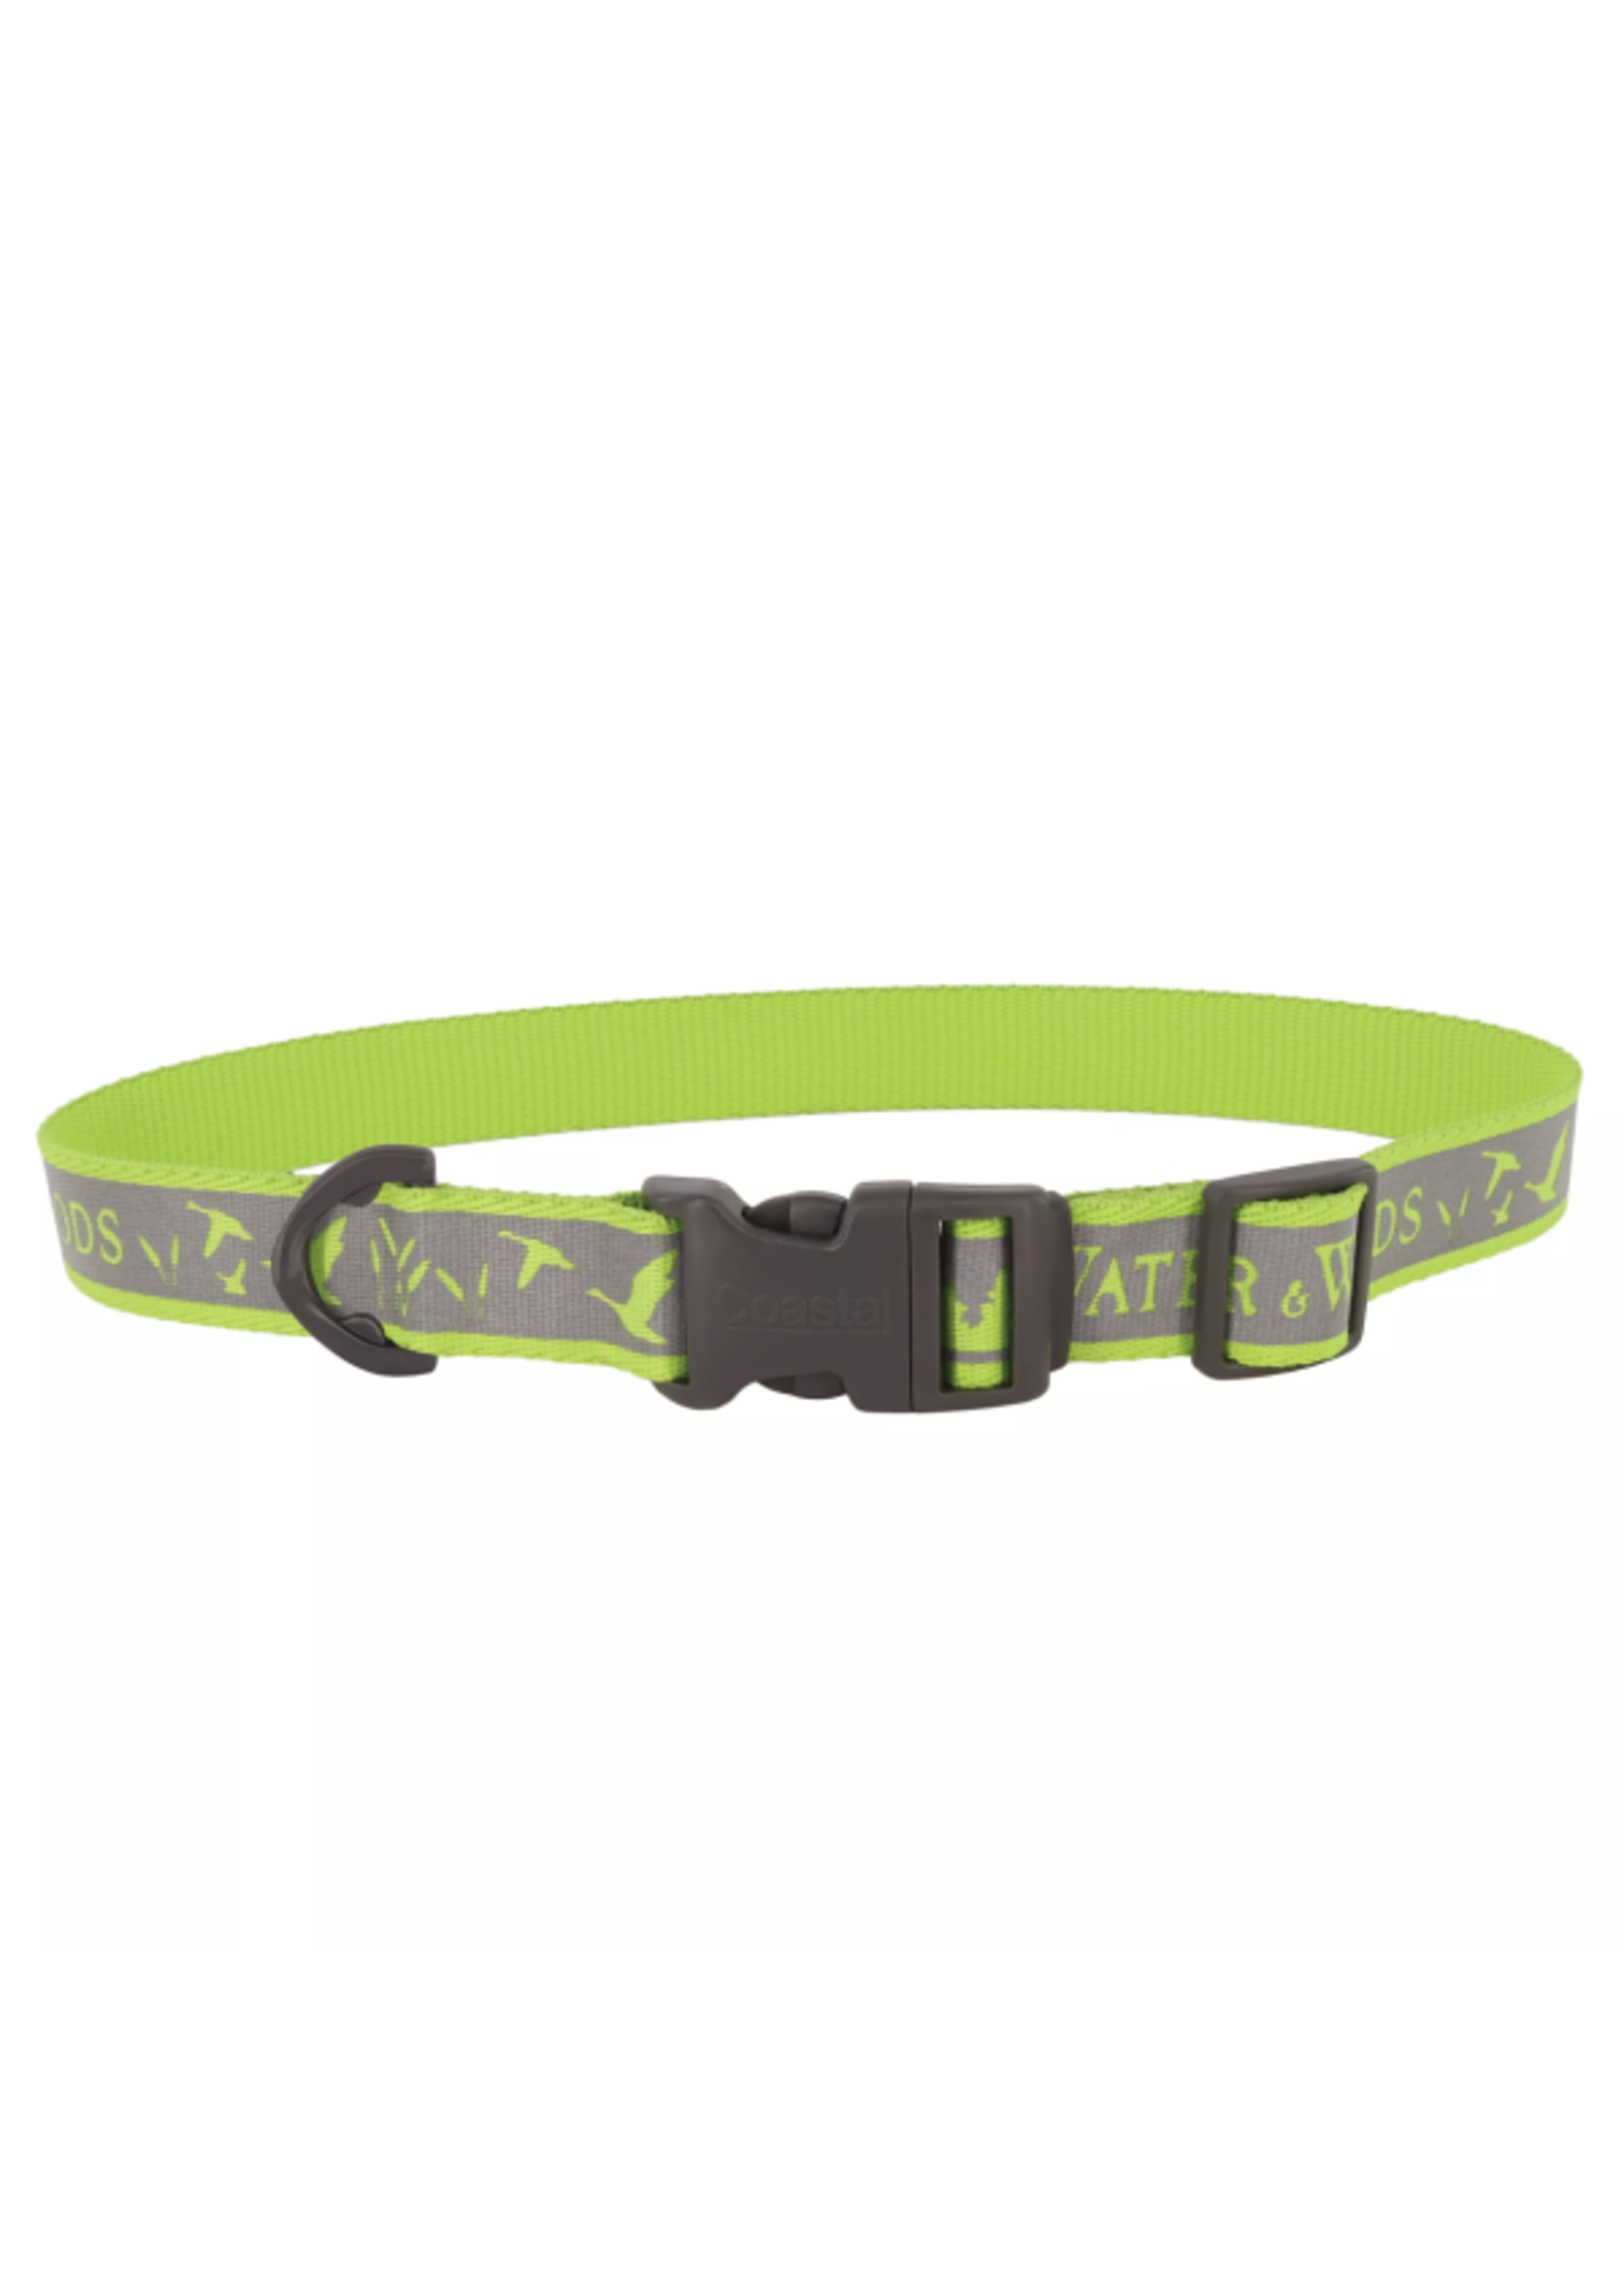 Coastal Pet Products Inc. Water & Woods Adjustable Reflective Collar Lime